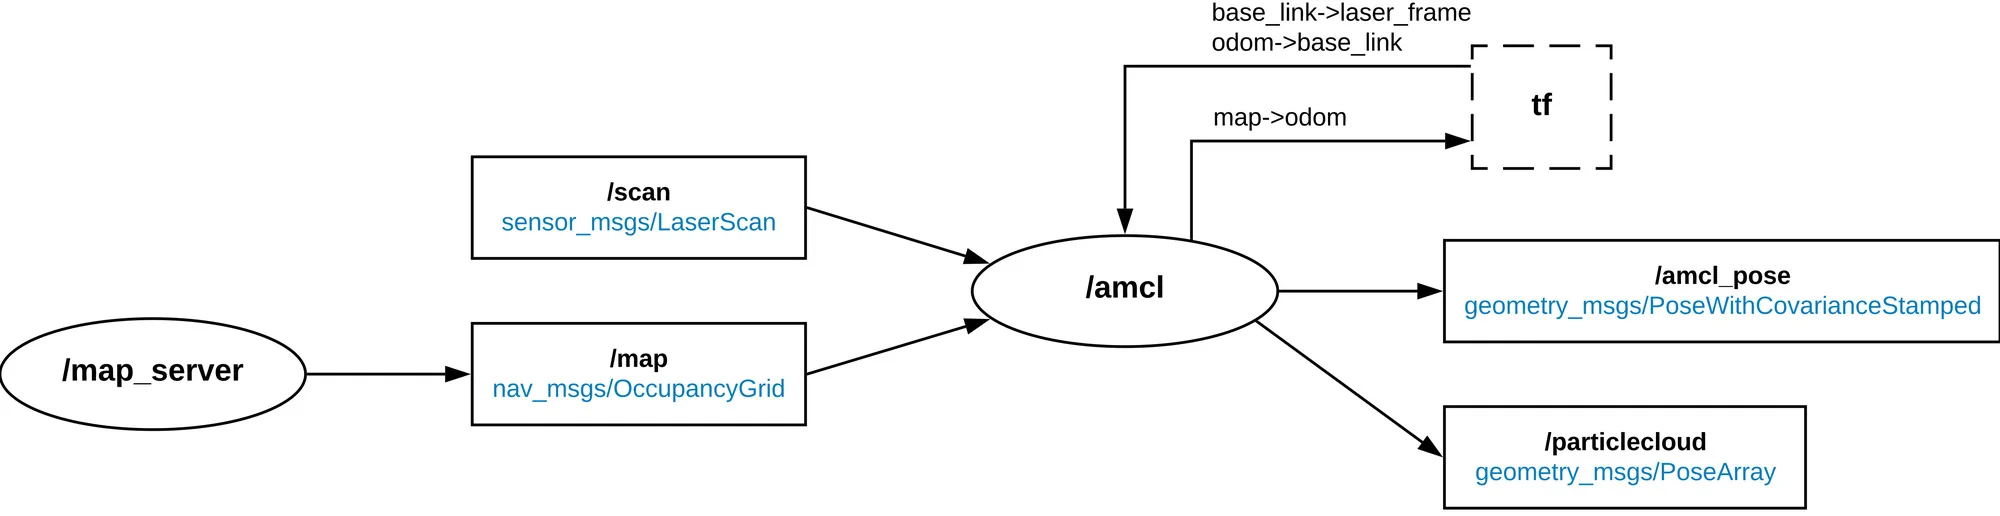 Graph using AMCL